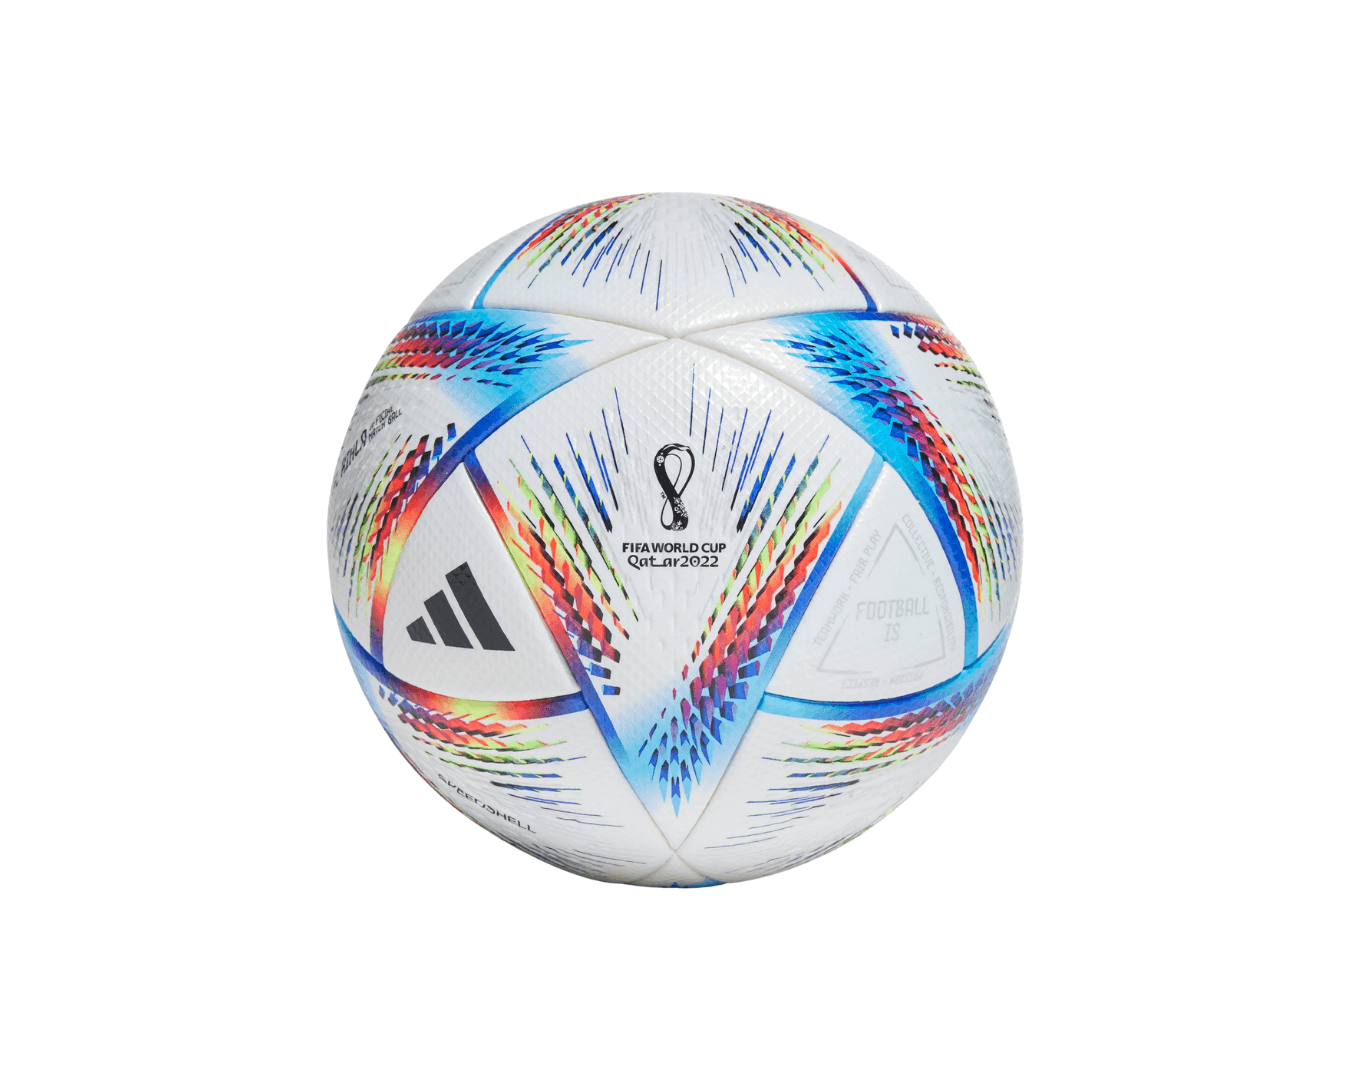 https://thebootsmania.com/wp-content/uploads/2022/04/Adidas-2022-FIFA-World-Cup-Official-Match-Ball-H57783-1.png